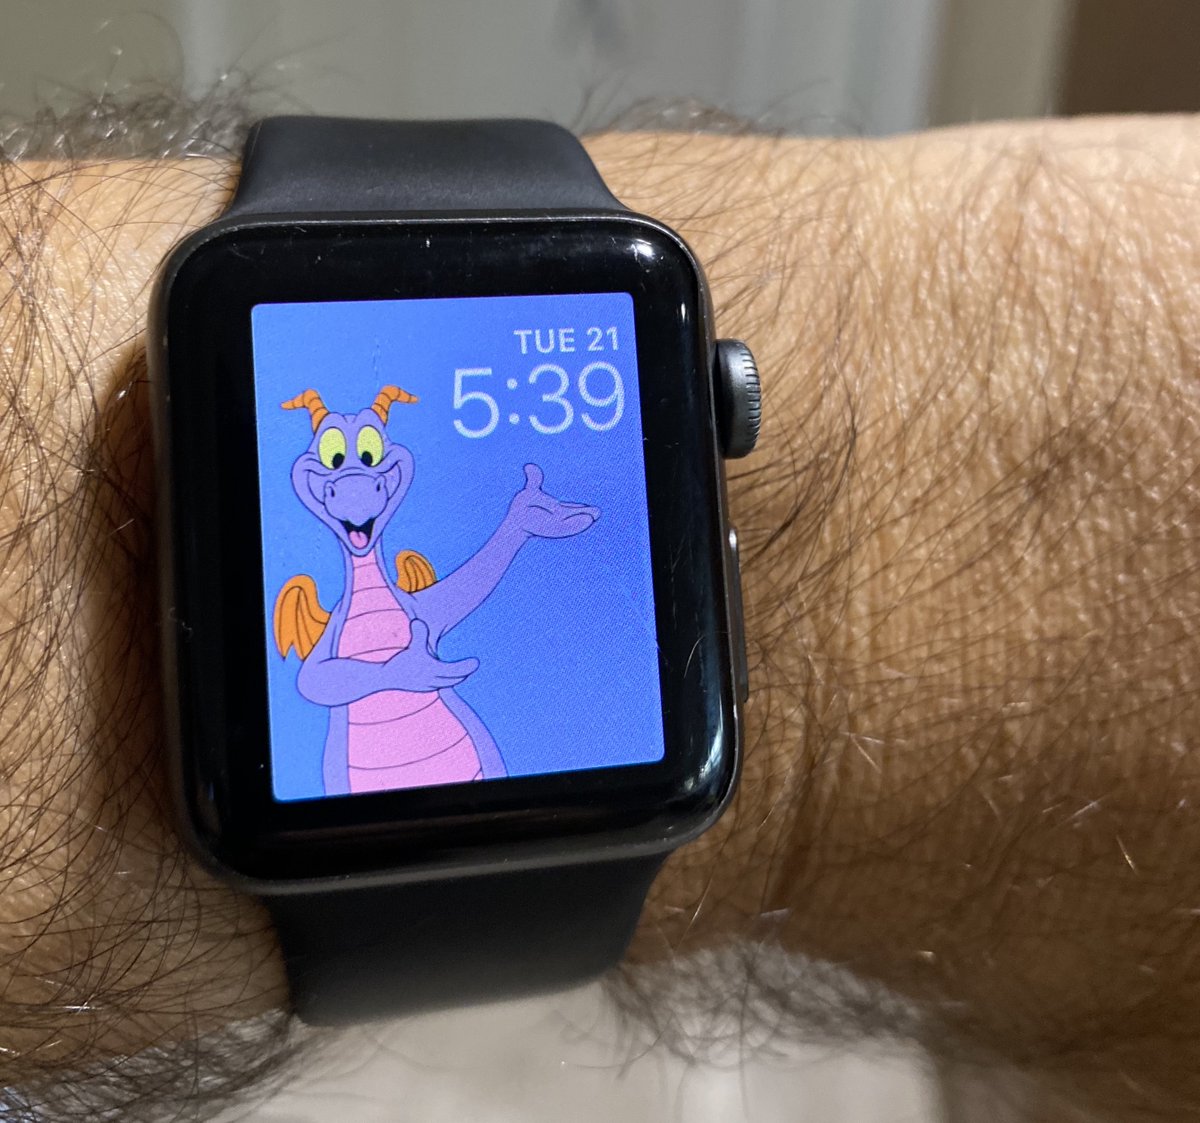 How Bowers on X: "Here are all 11 of the Disney Apple Watch faces I've  made. Subjects include #CaptainEo, #Epcot, #SpaceshipEarth, #HauntedMansion  & more: https://t.co/6K24jMIXTz https://t.co/3bOdjAUXVX" / X